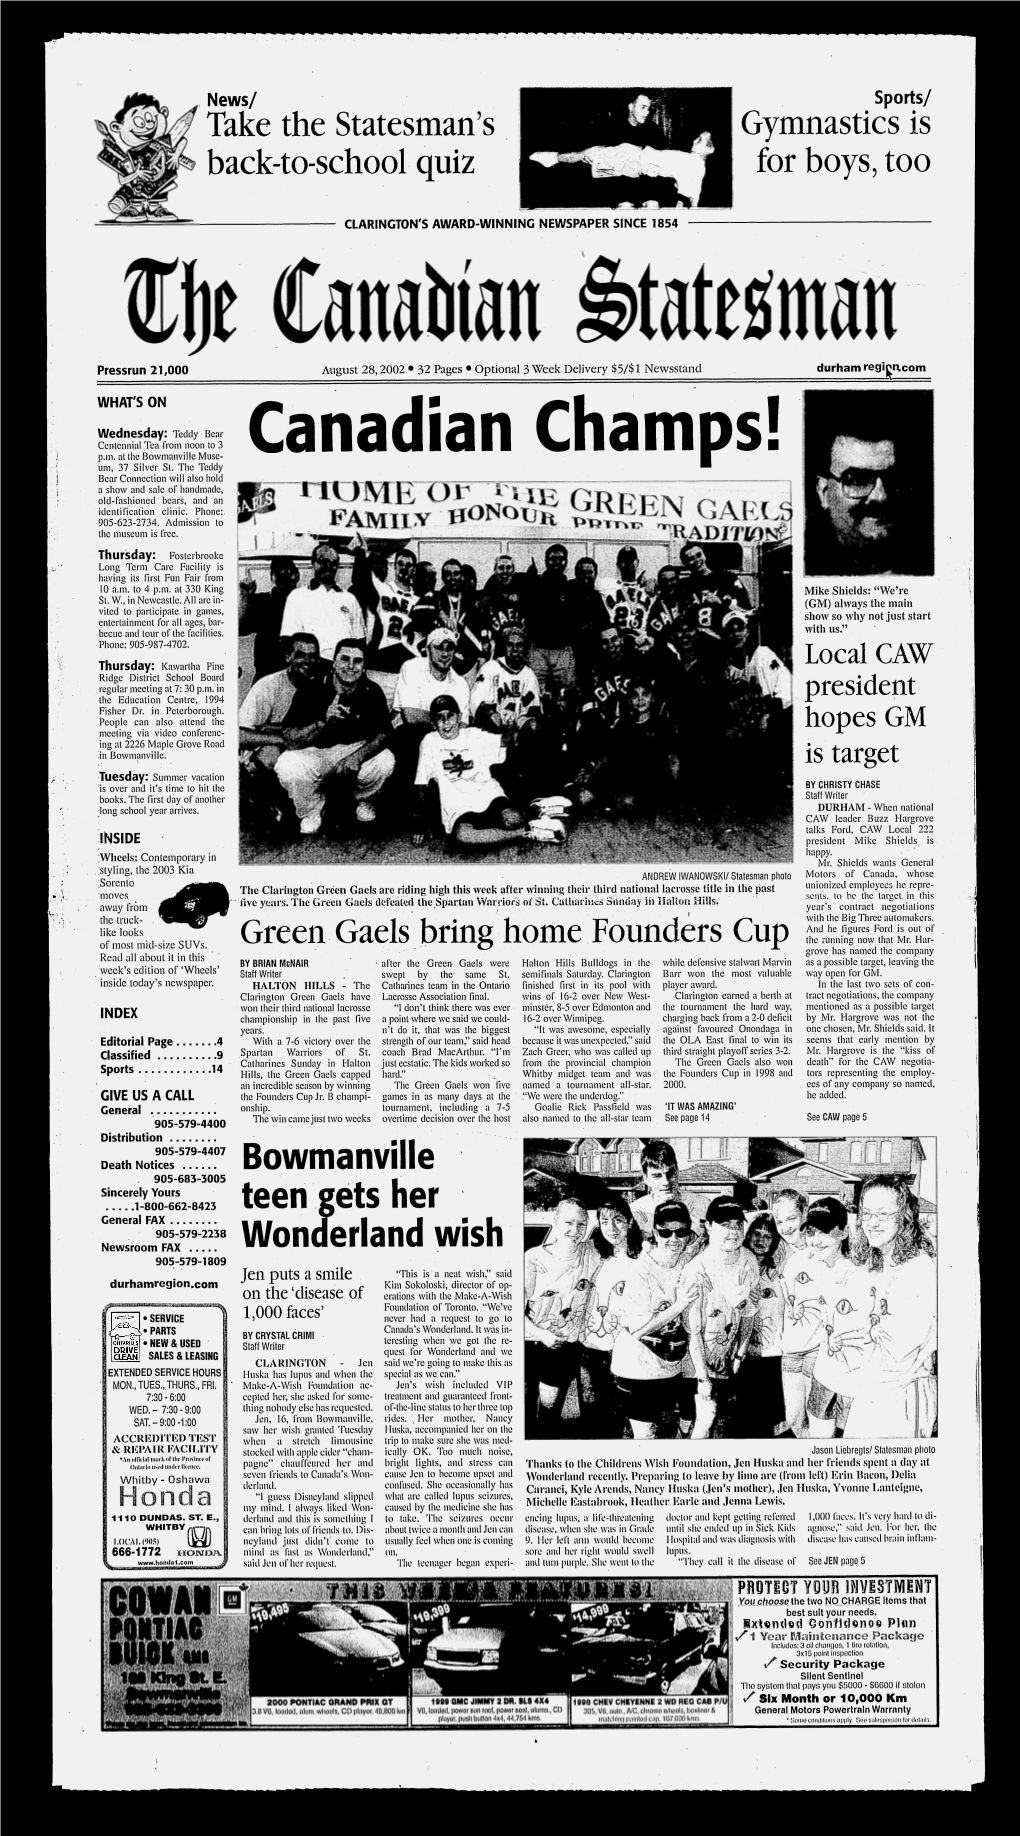 Take Back the Statesman's To-School Quiz Gymnastics Is for Boys, Too Green Gaels Bring Home Founders Cup Bowmanville Teen Gets